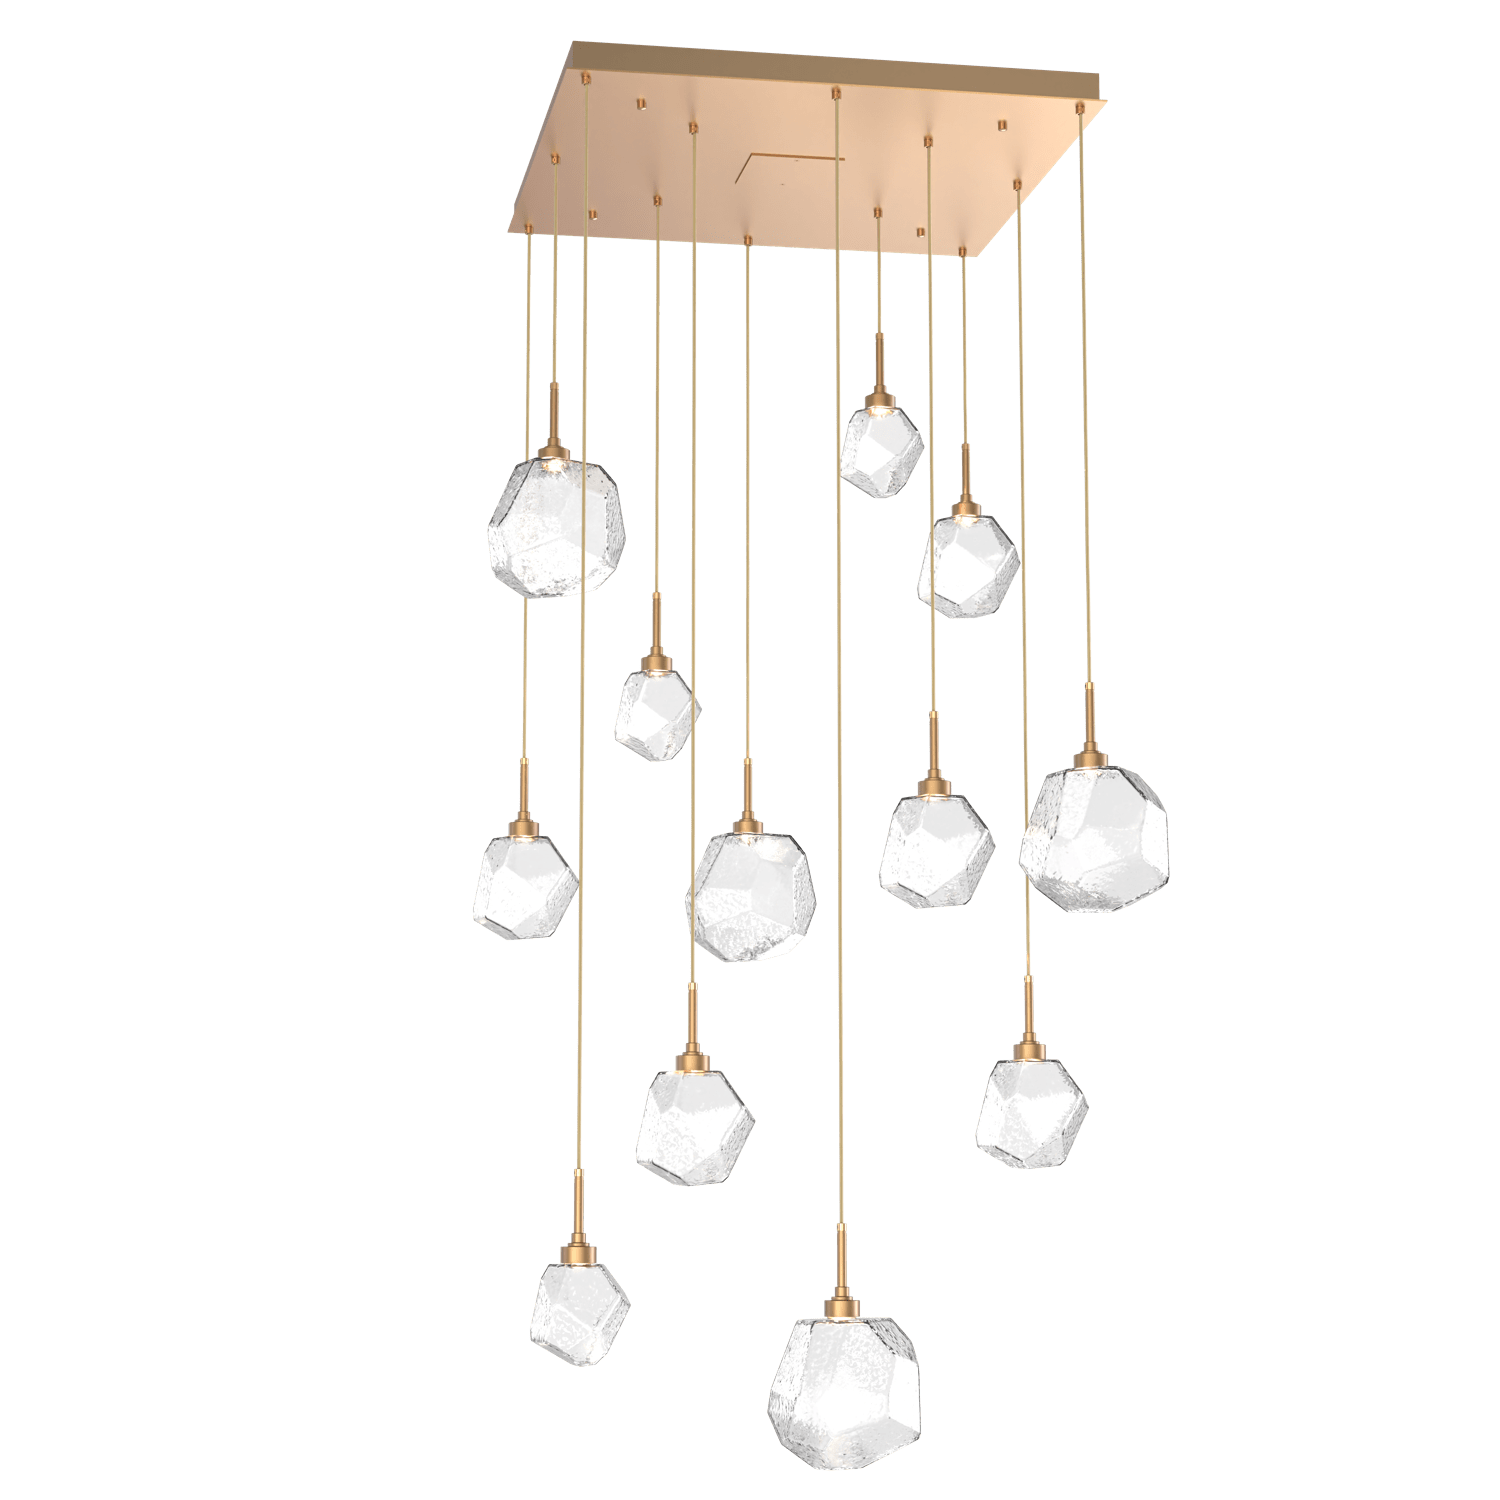 CHB0039-12-NB-C-Hammerton-Studio-Gem-12-light-square-pendant-chandelier-with-novel-brass-finish-and-clear-blown-glass-shades-and-LED-lamping